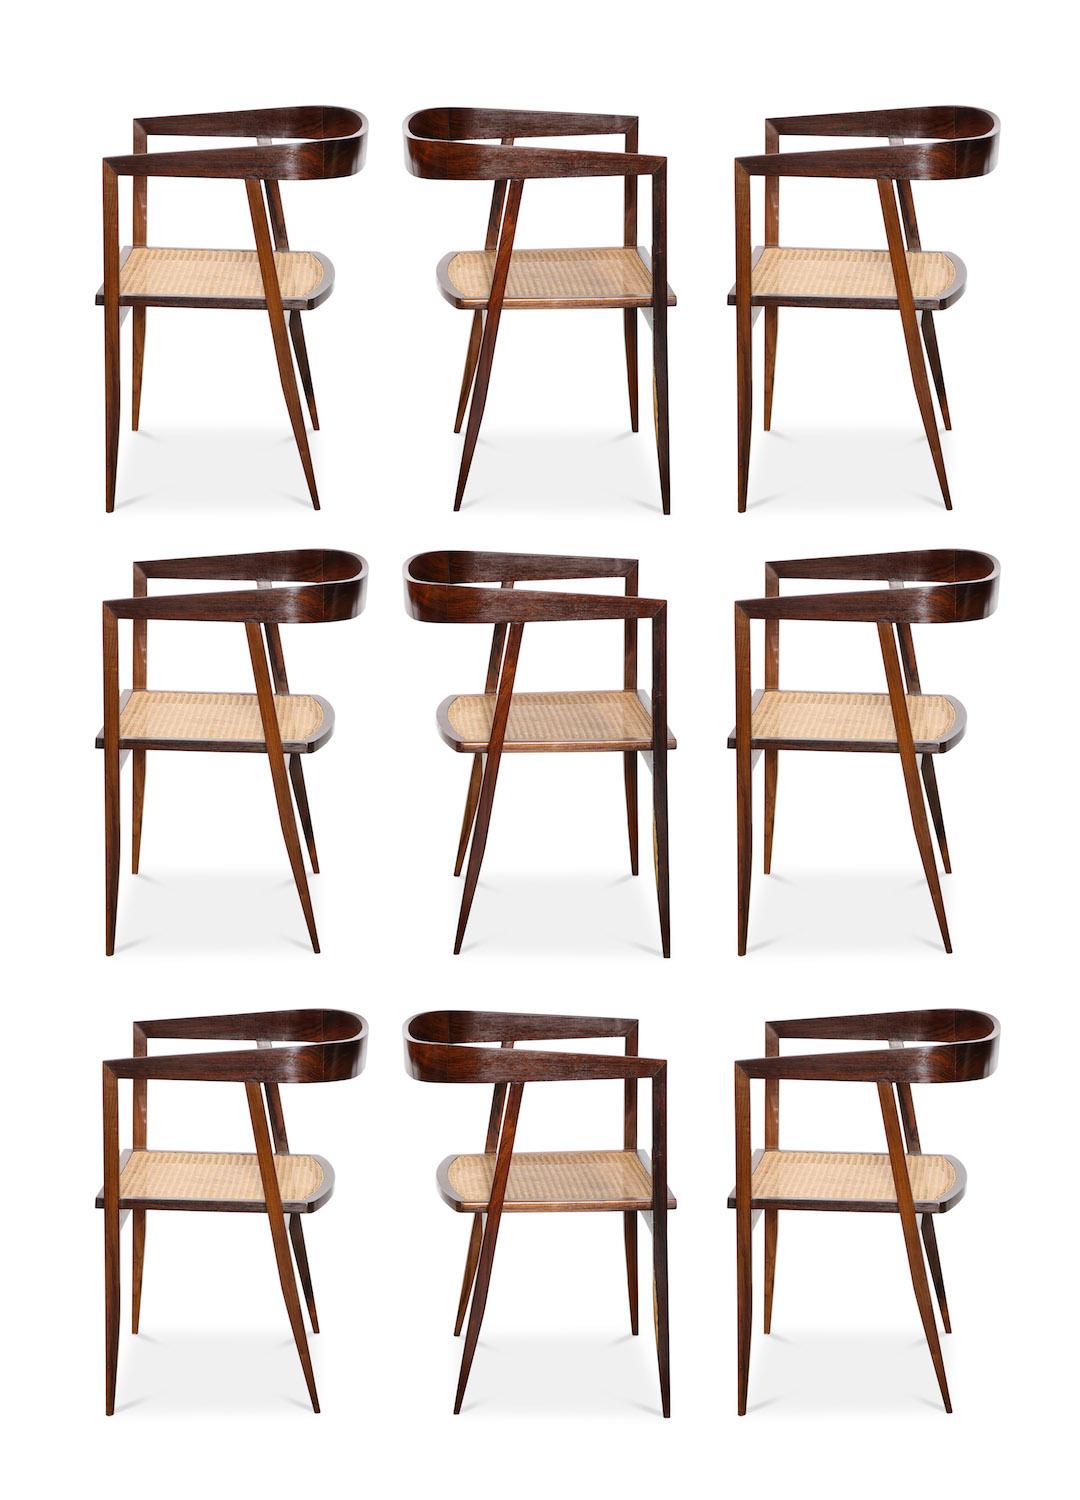 Joaquim Tenreiro rare set of 9 armchairs. A complete set of dining chairs by this Brazilian master. Minimal and sculptural design. Jacaranda frames with sturdy rattan seats.